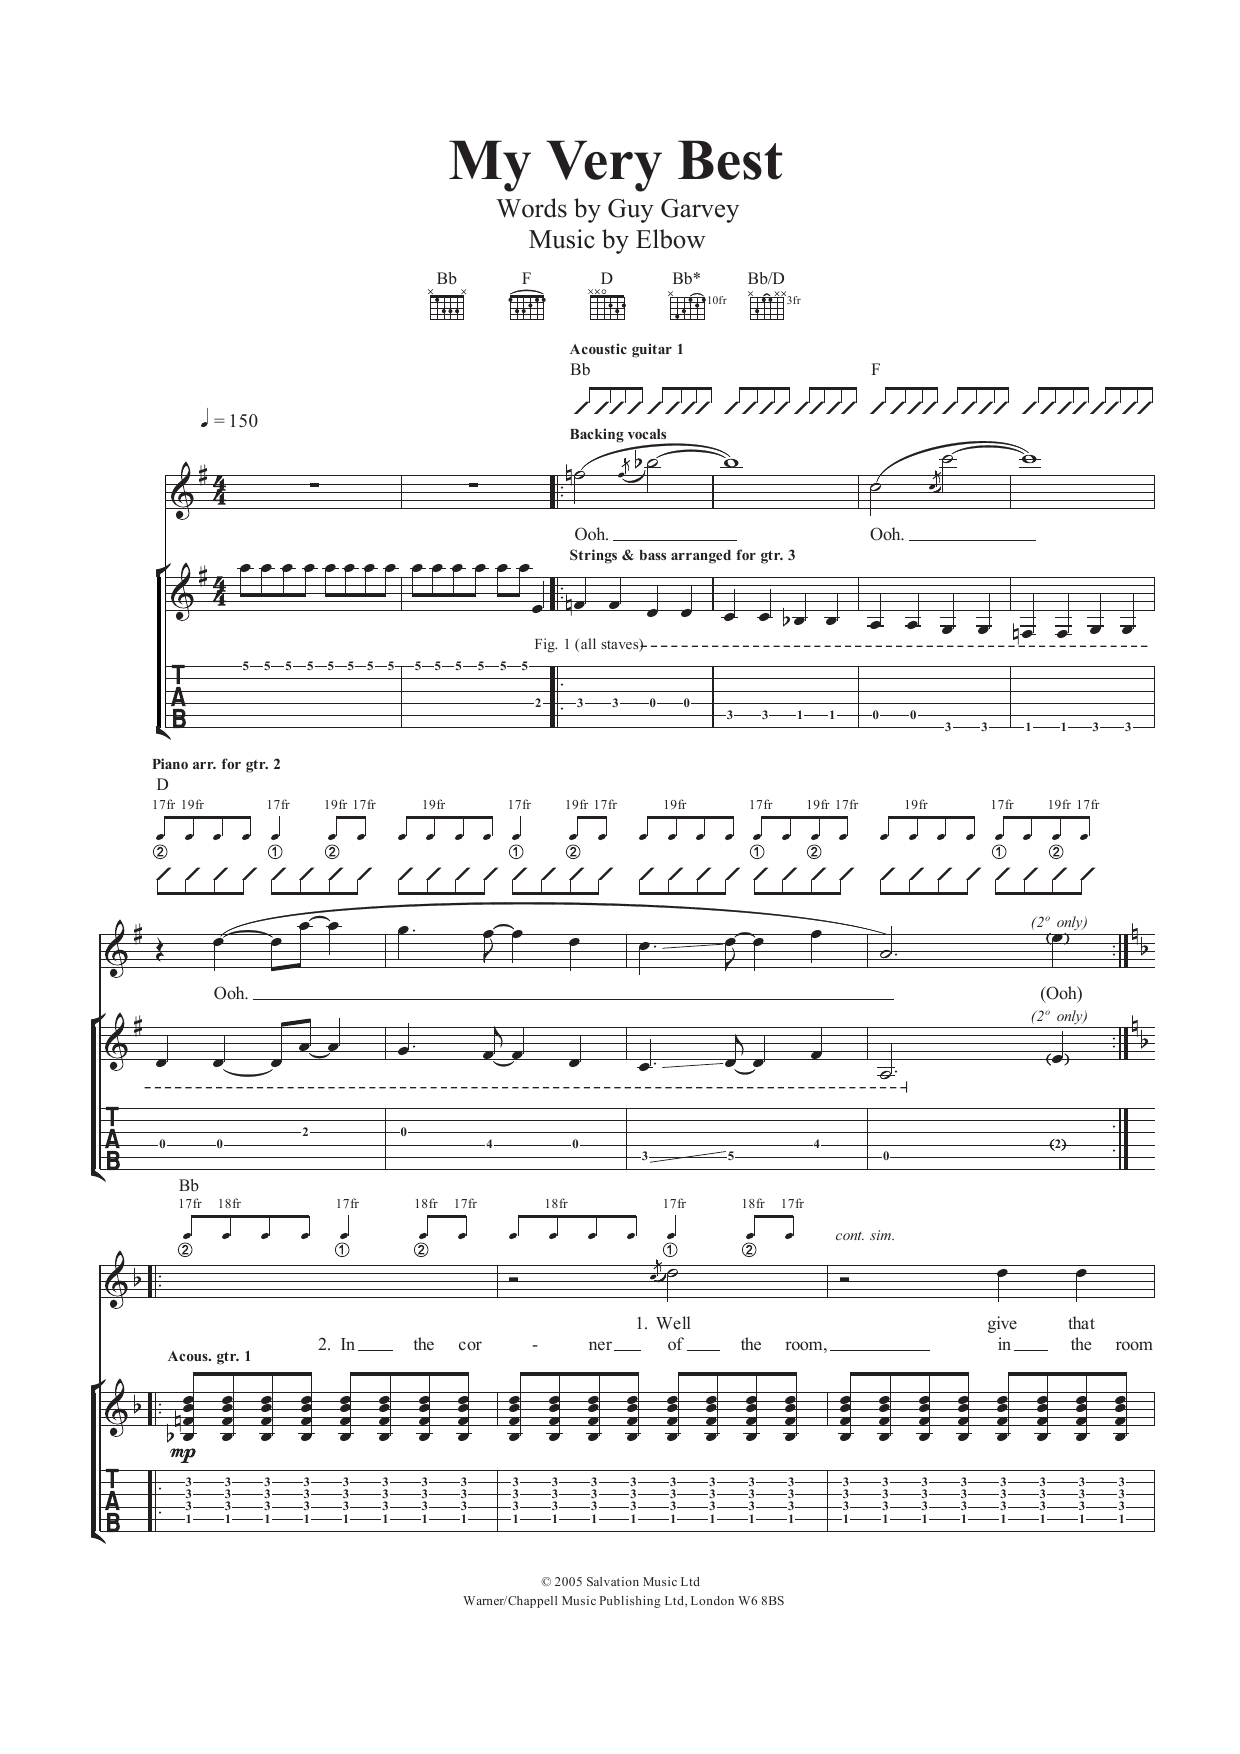 Download Elbow My Very Best Sheet Music